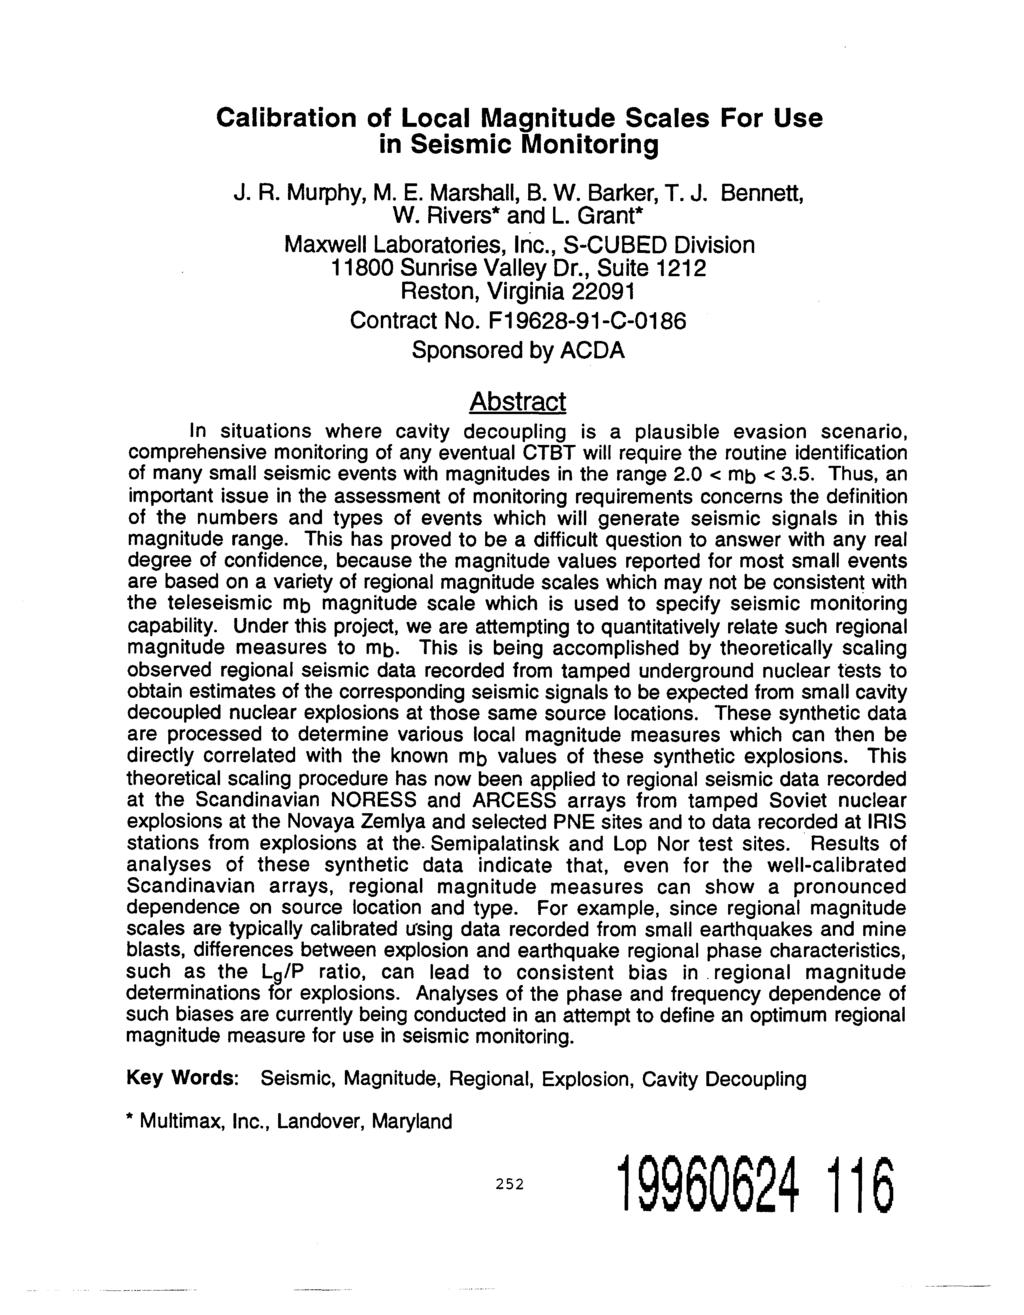 Calibration of Local Magnitude Scales For Use in Seismic Monitoring J. R. Murphy, M. E. Marshall, B. W. Barker, T. J. Bennett, W. Rivers* and L. Grant* Maxwell Laboratories, Inc.